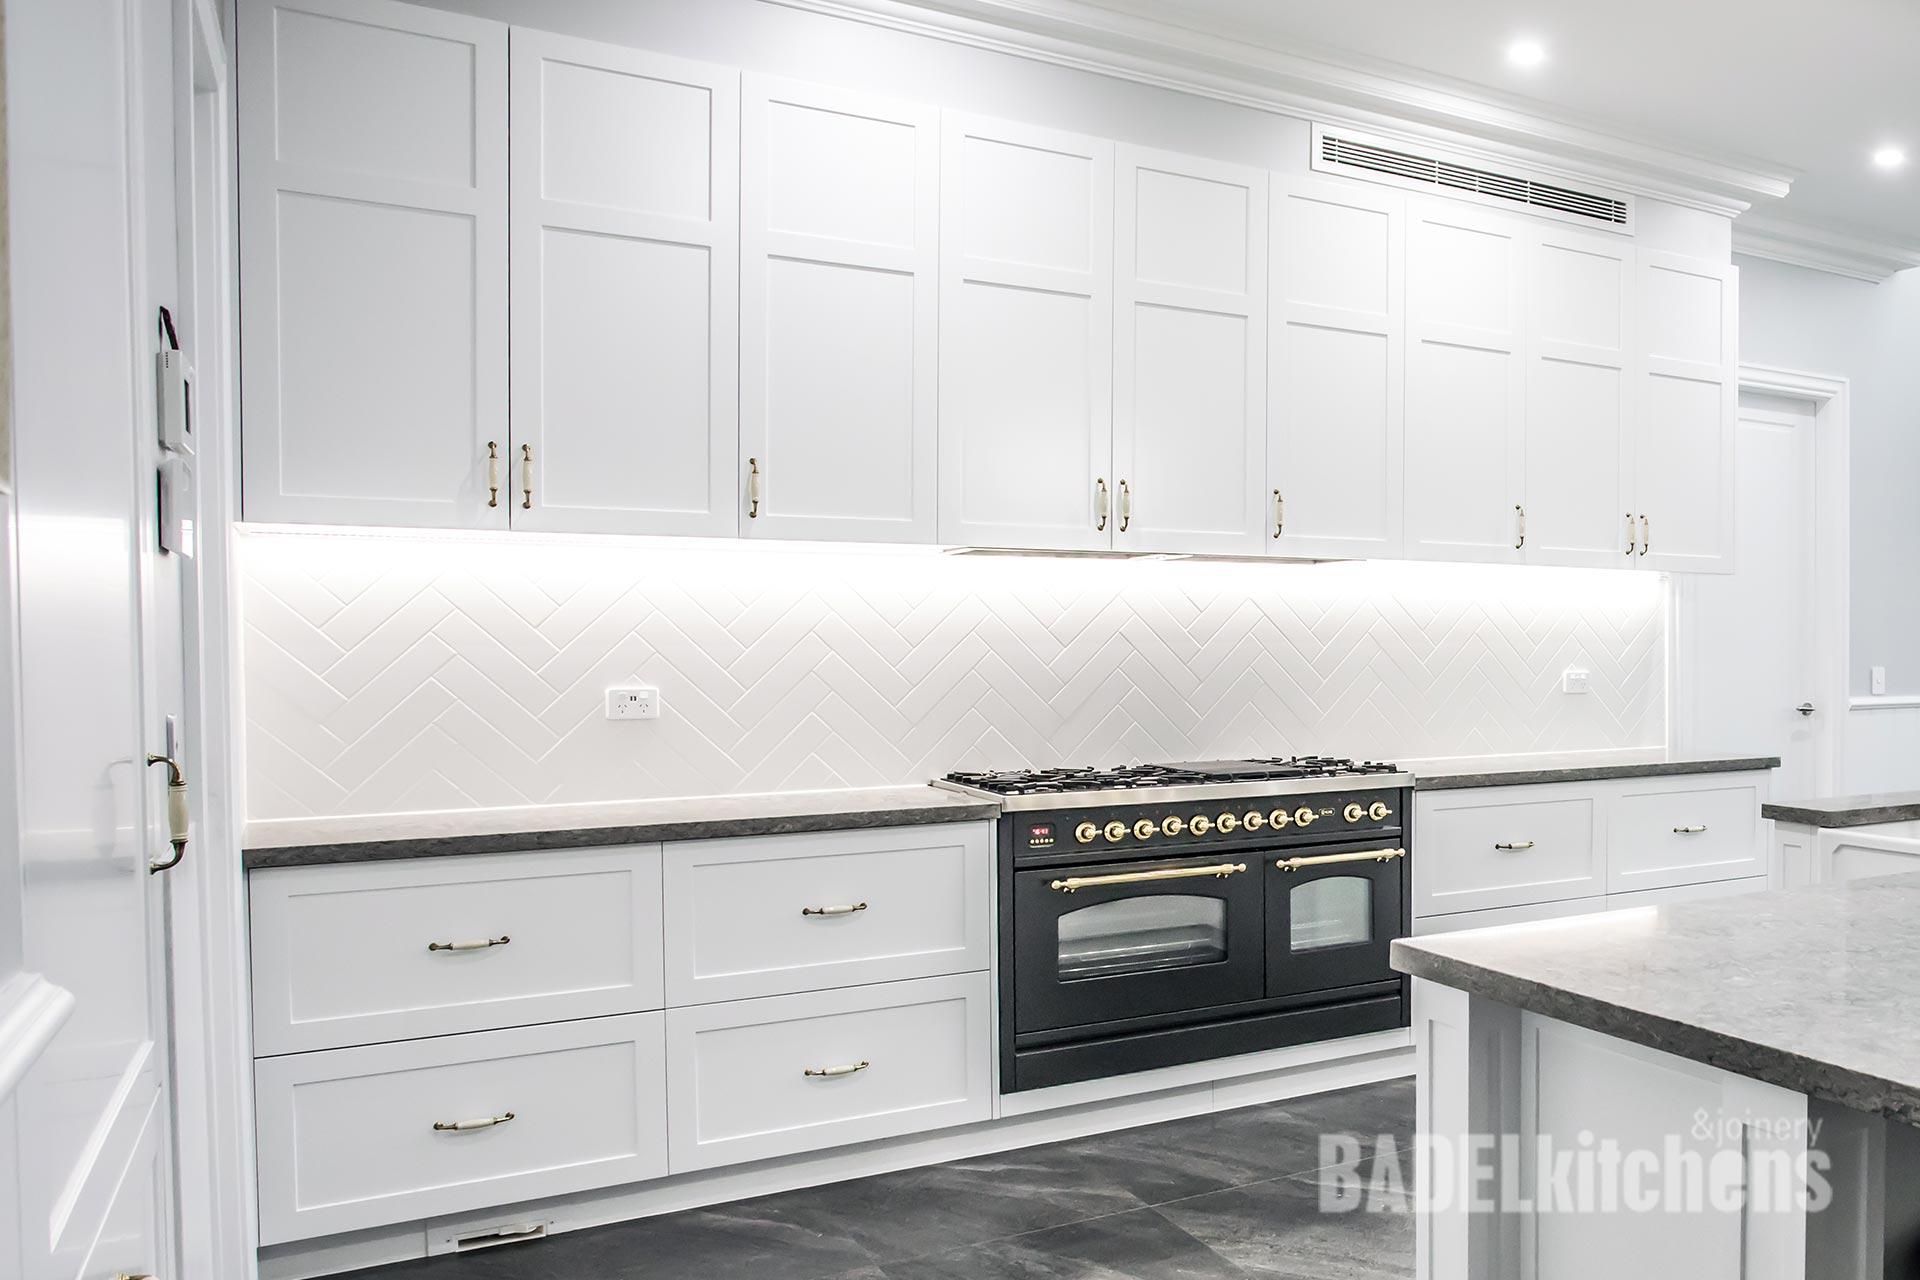 Shaker style cabinets in Hamptons style kitchen